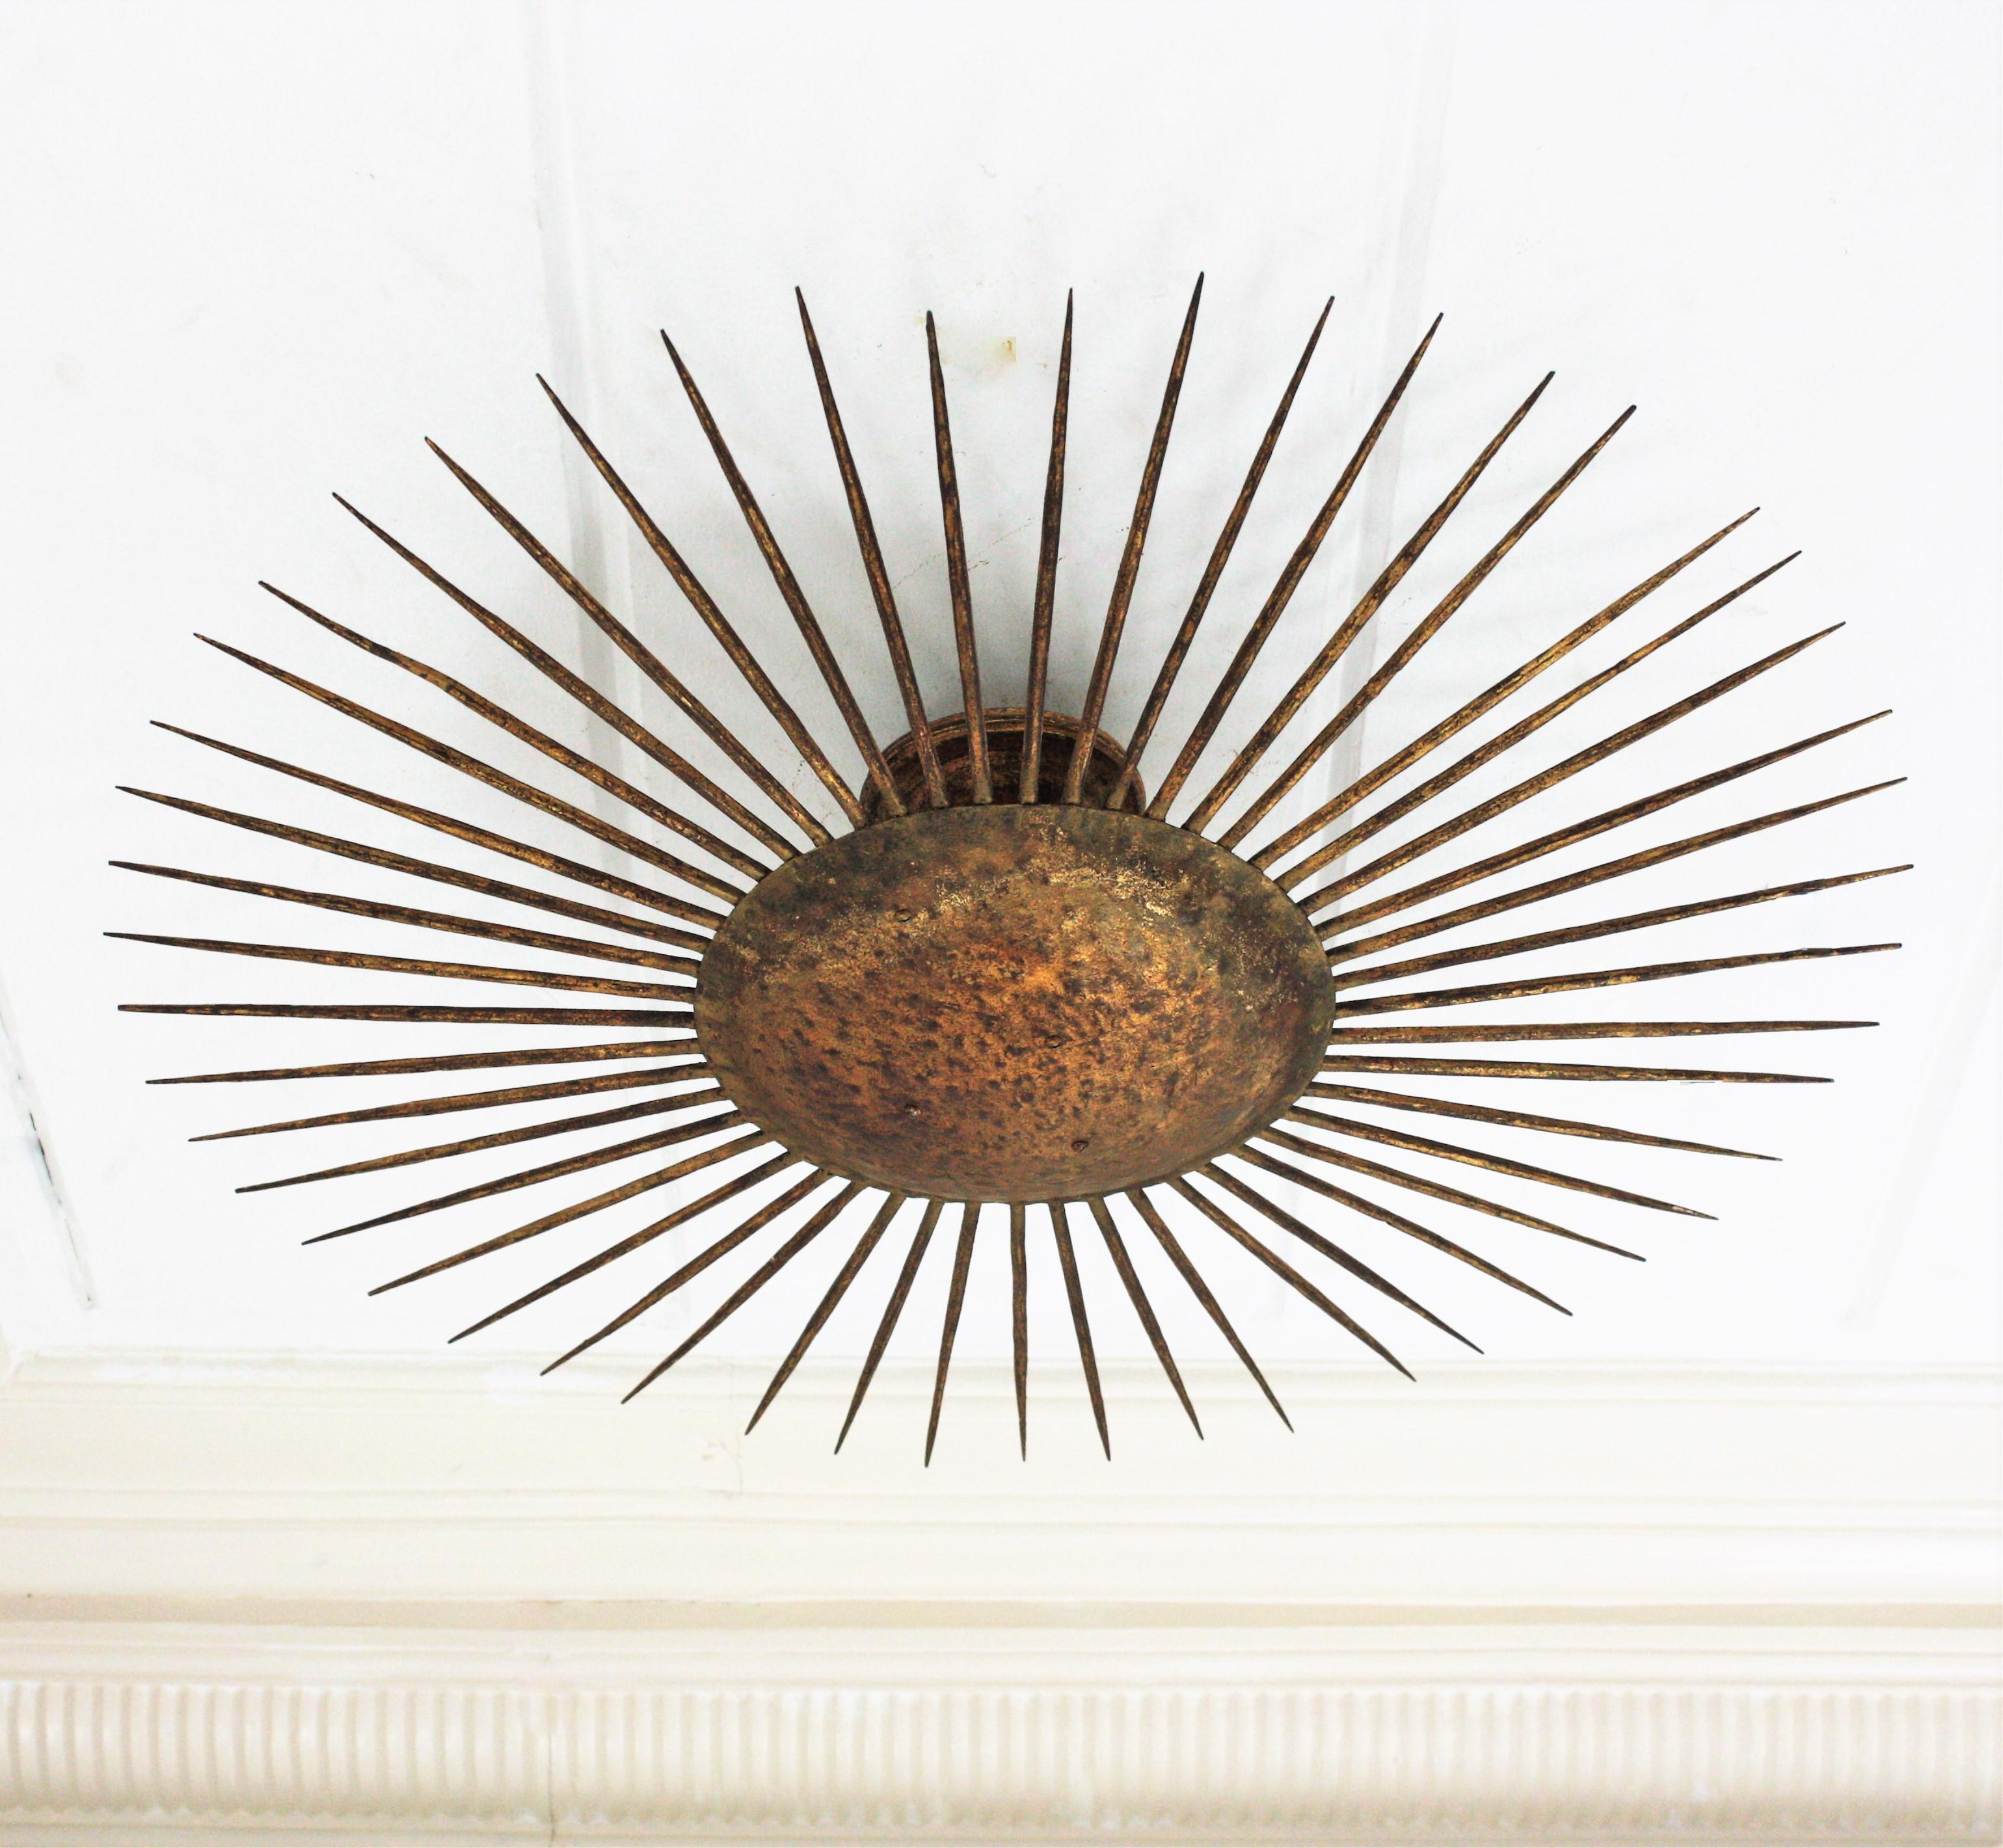 Metal French Sunburst Ceiling Light Fixture in Gilt Wrought Iron, 1940s For Sale